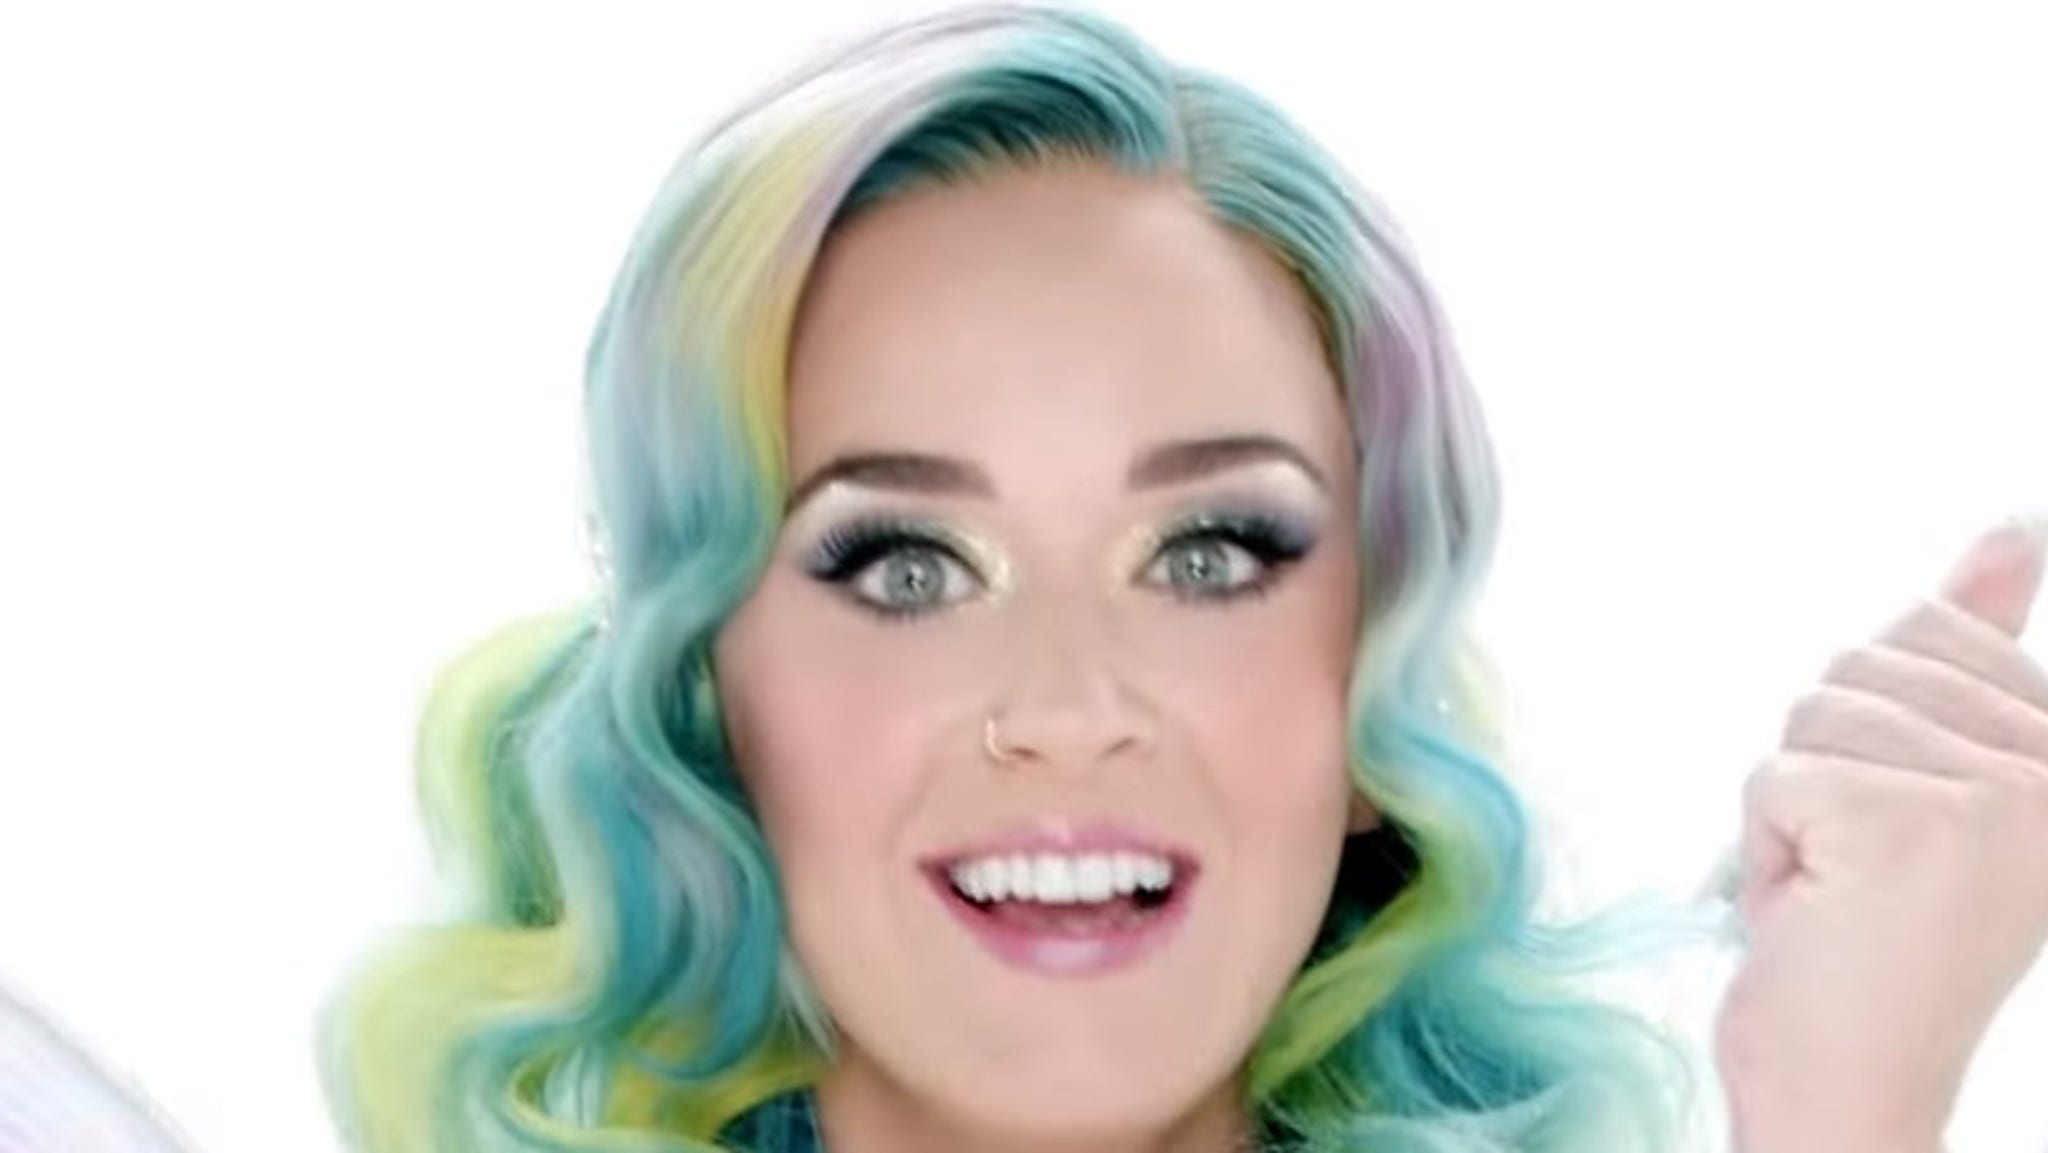 Katy Perry Spreads Some Holiday Cheer In Her New Campaign For Handm